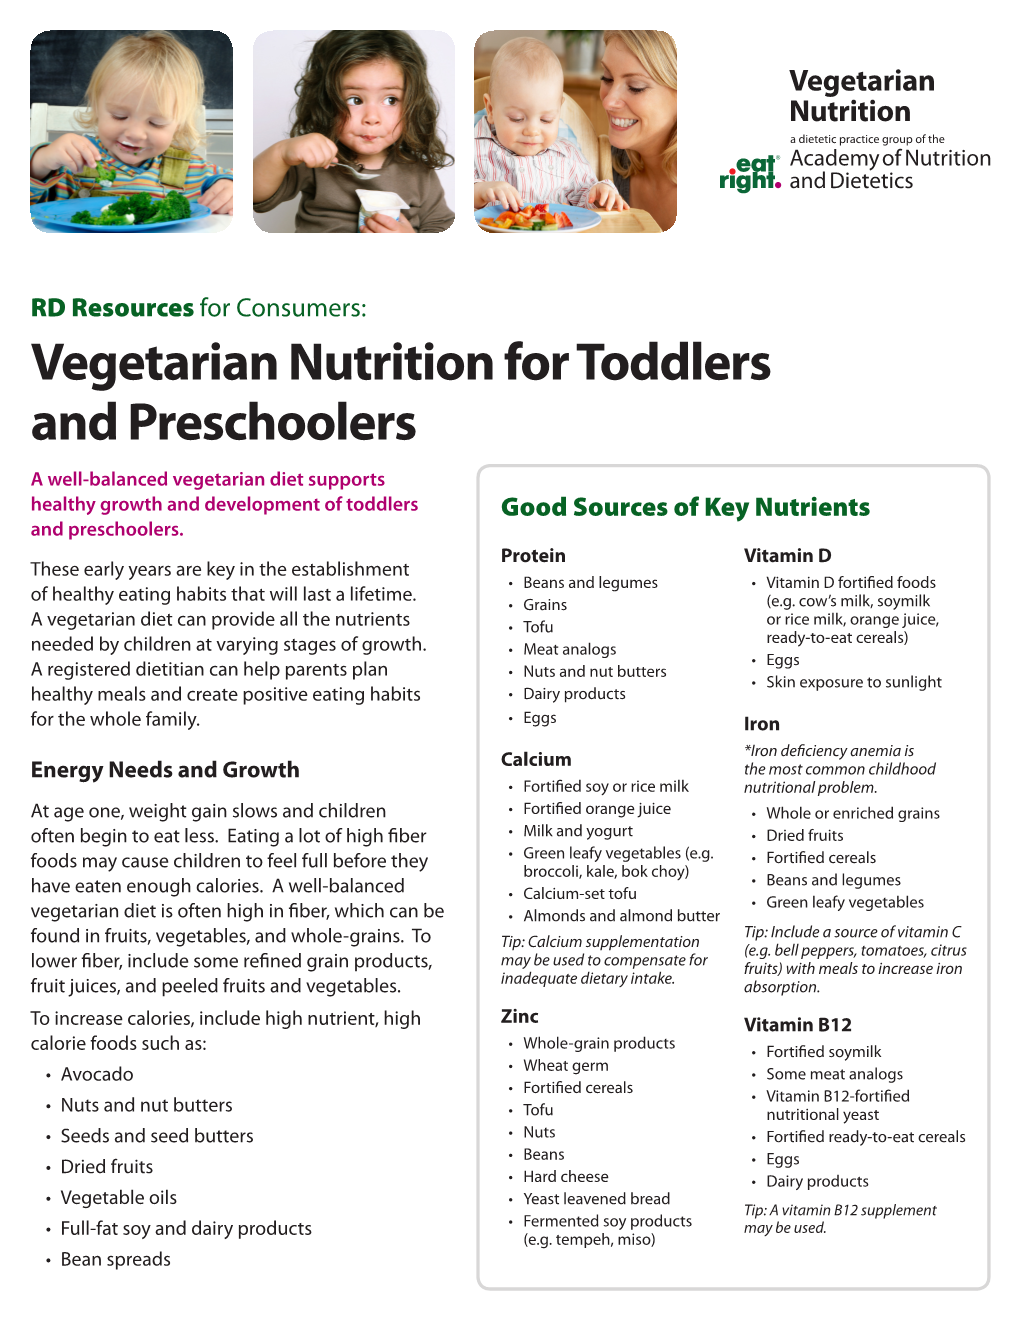 Vegetarian Nutrition for Toddlers and Preschoolers